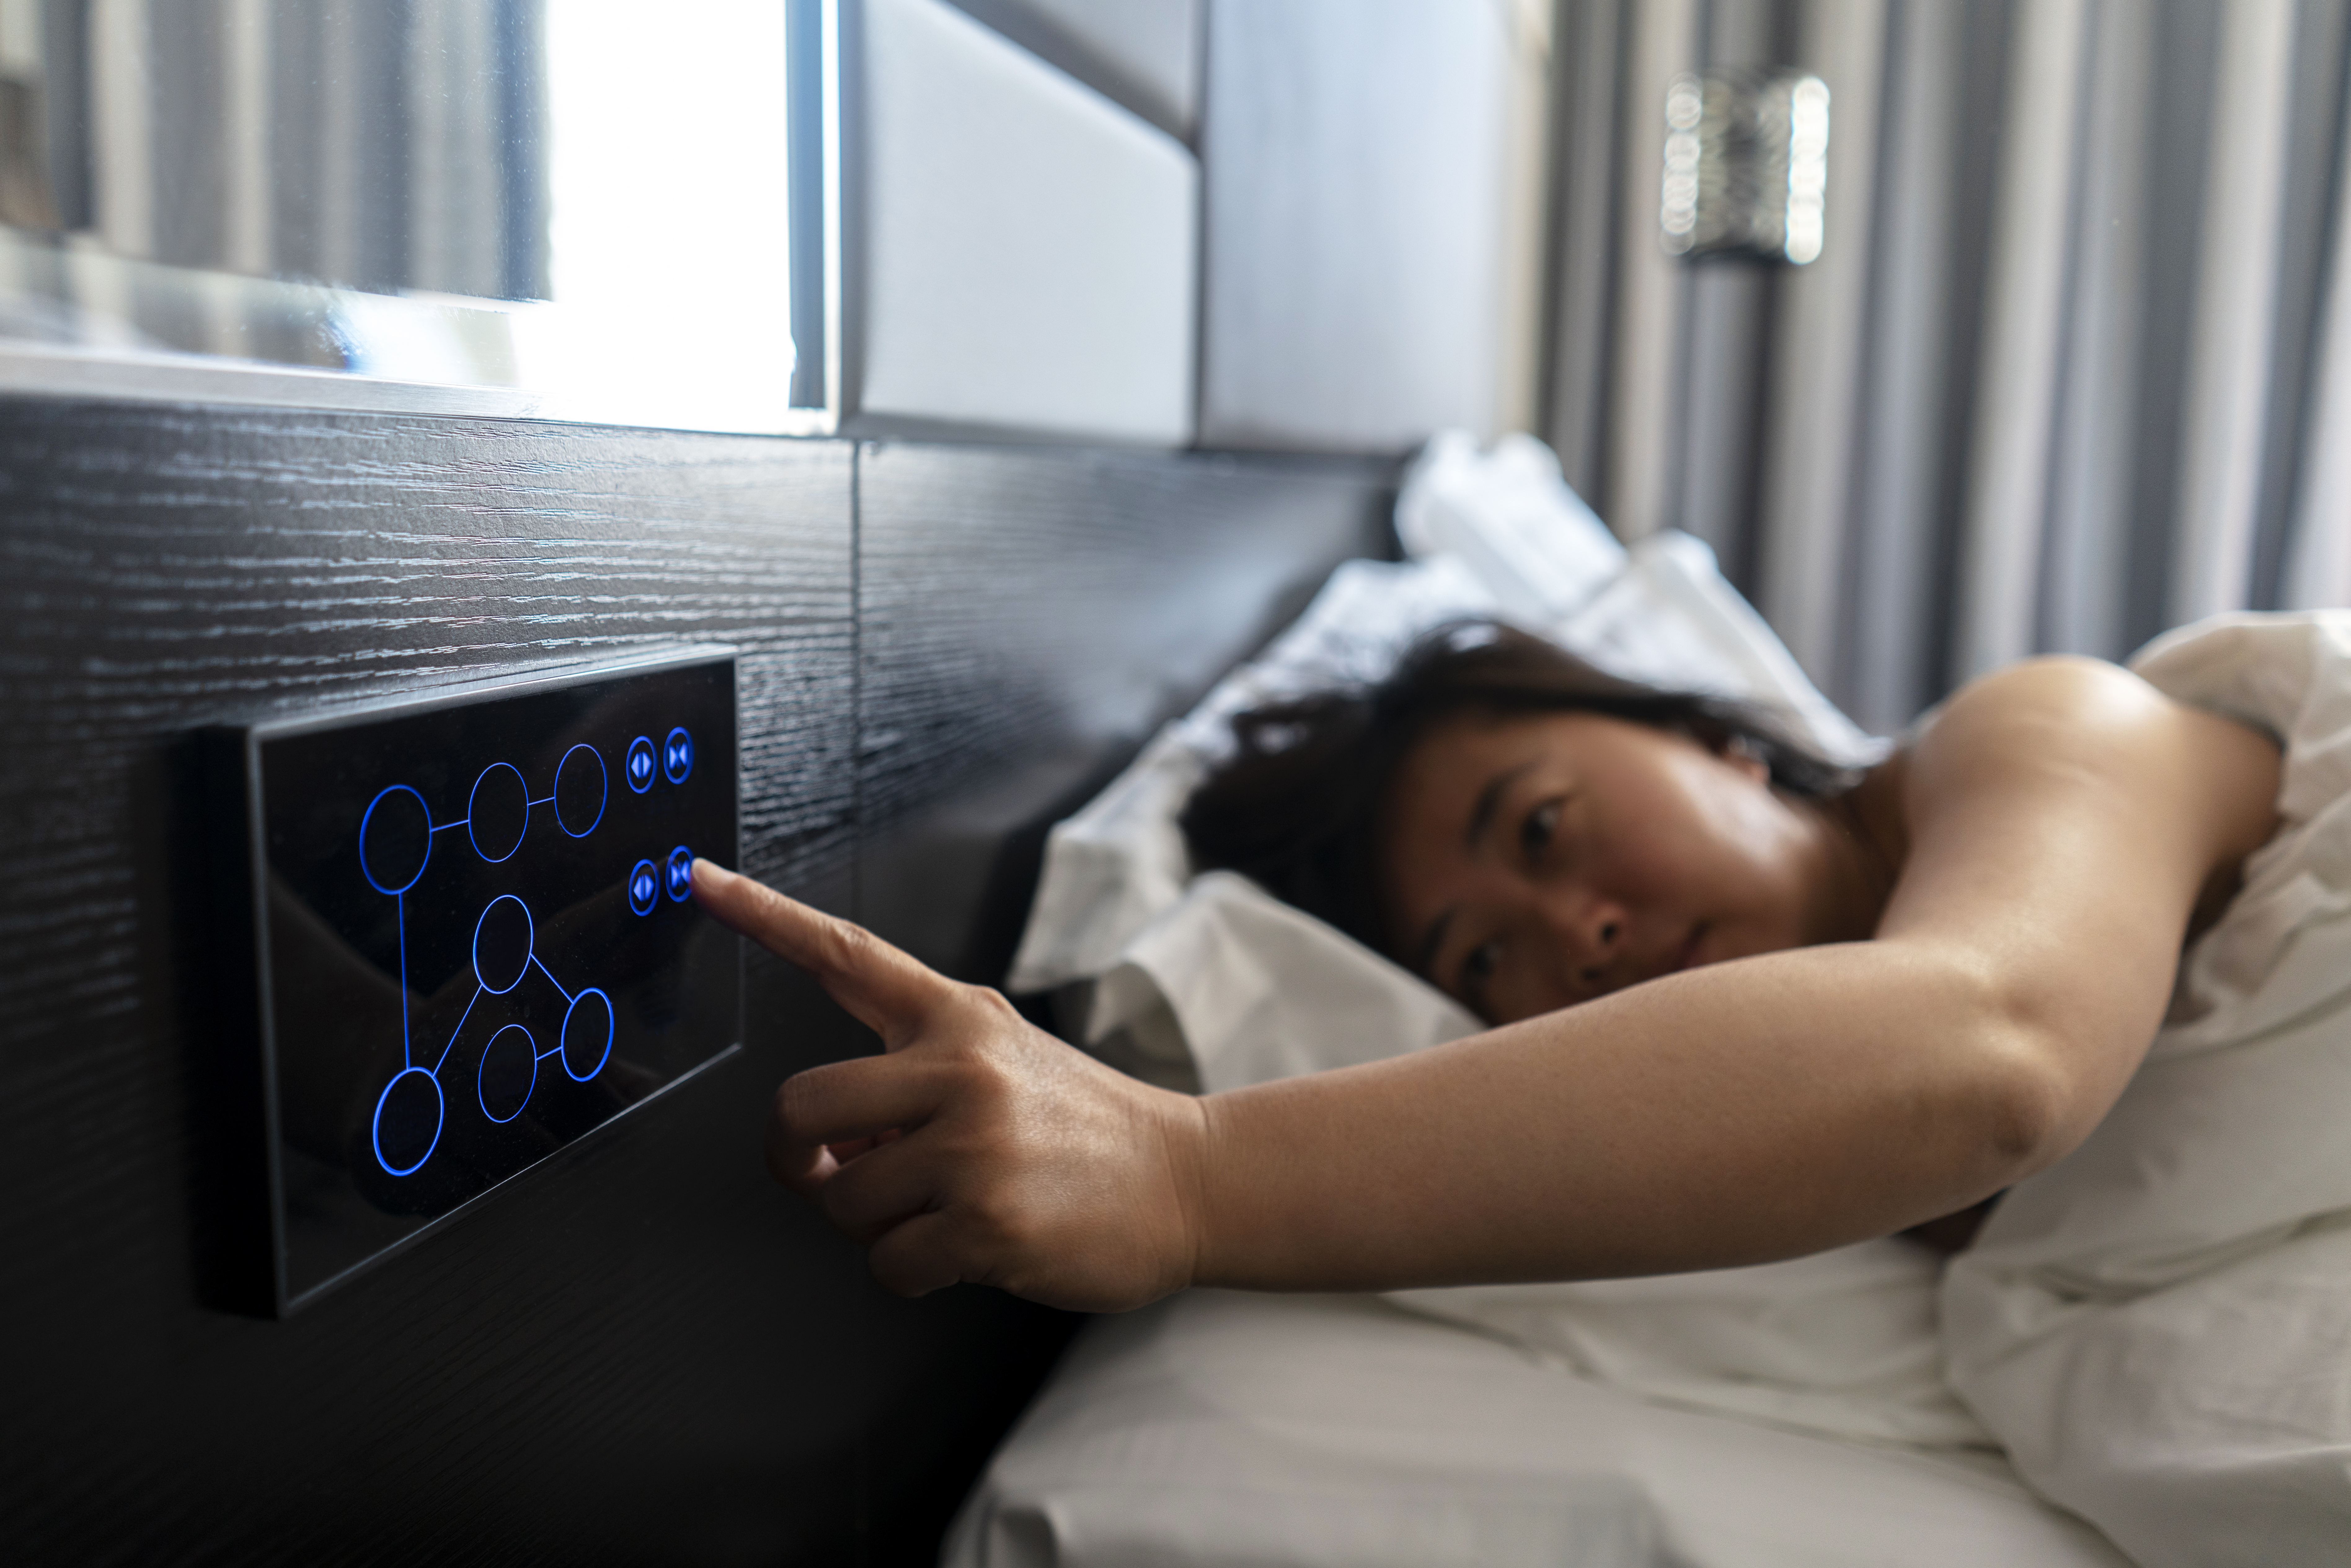 New smart tech is being rolled out across hotels - but not everyone is a fan